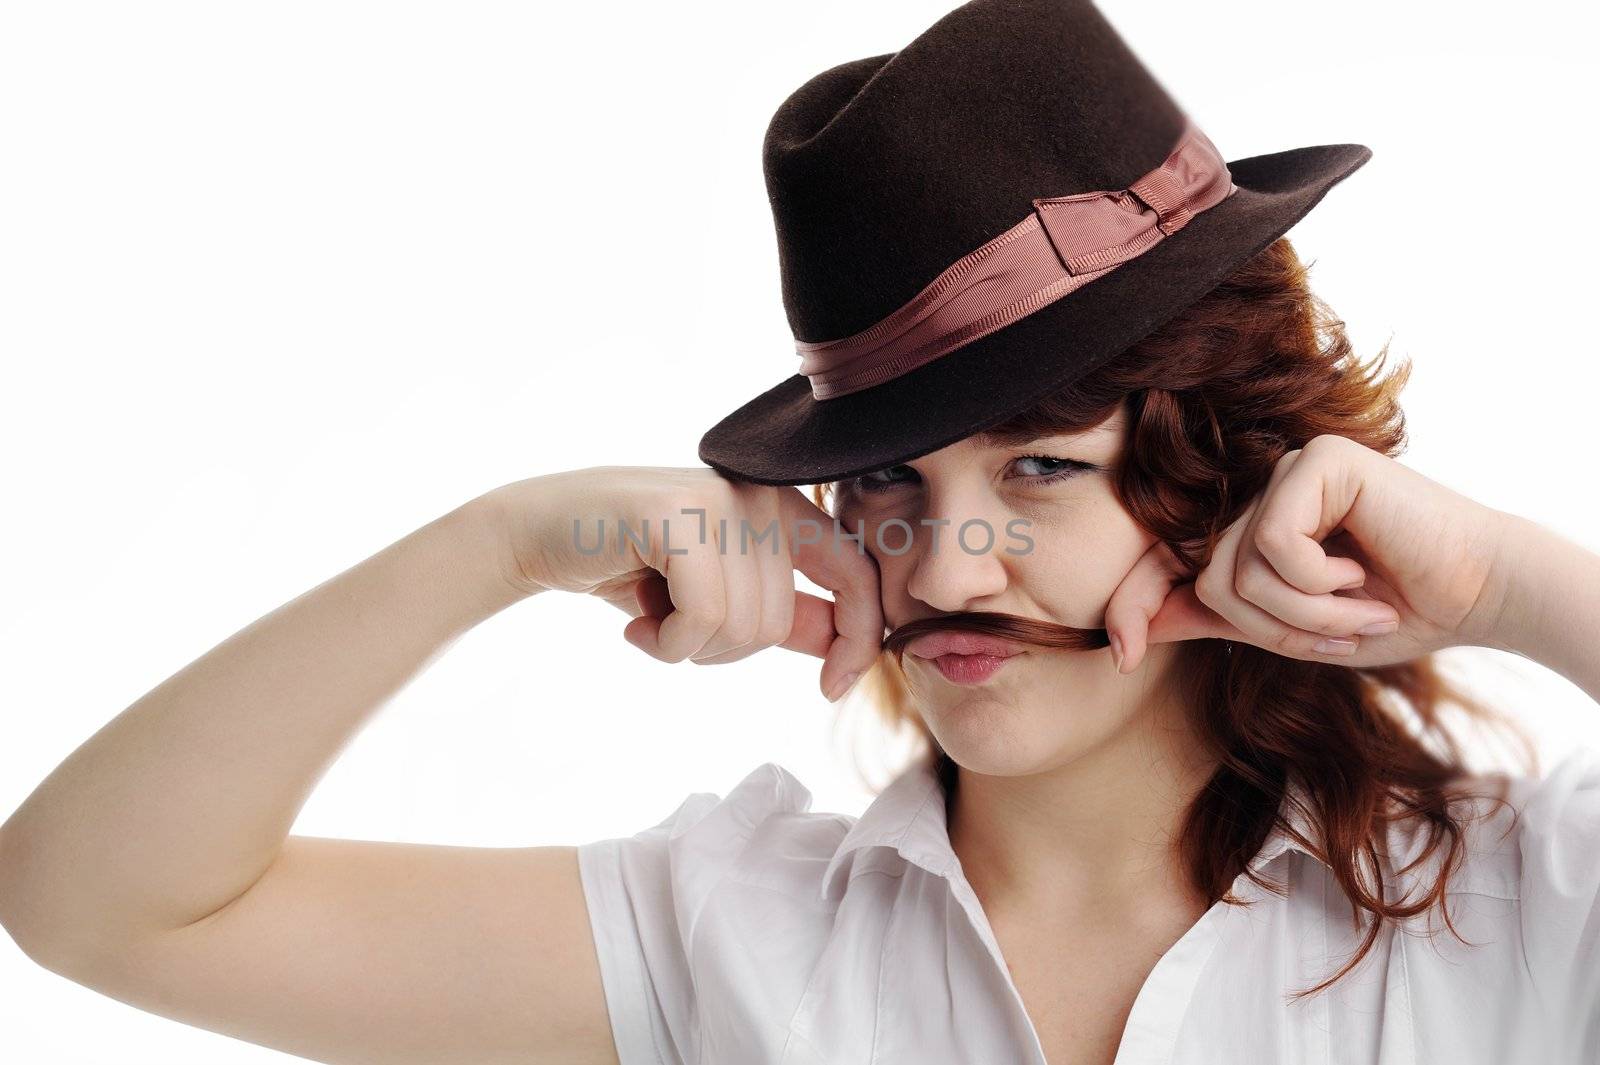 An image of a girl makes moustaches from the hair